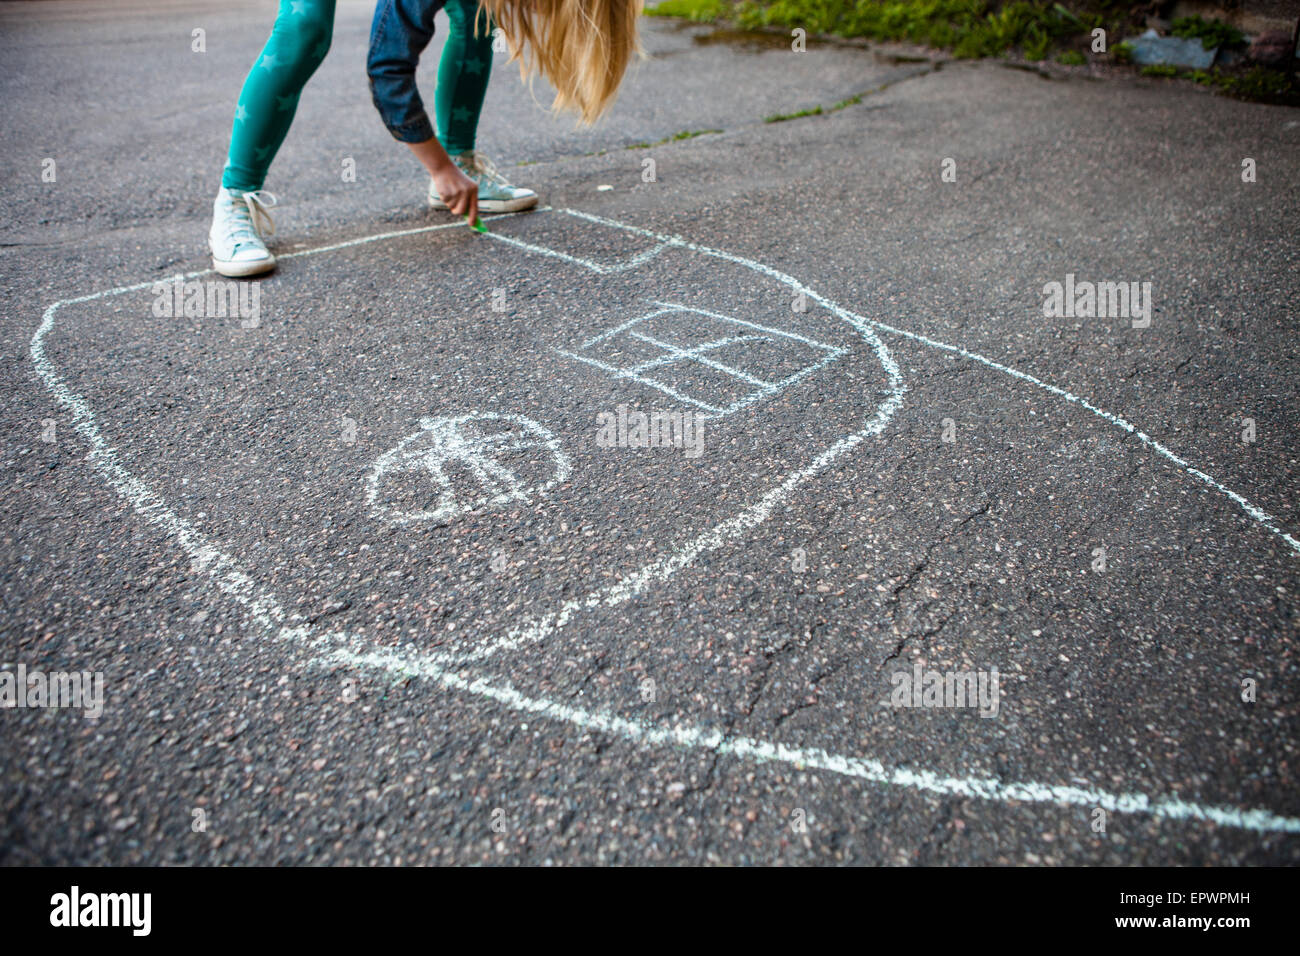 Girl drawing a picture of a house with street chalk outdoors on asphalt Stock Photo